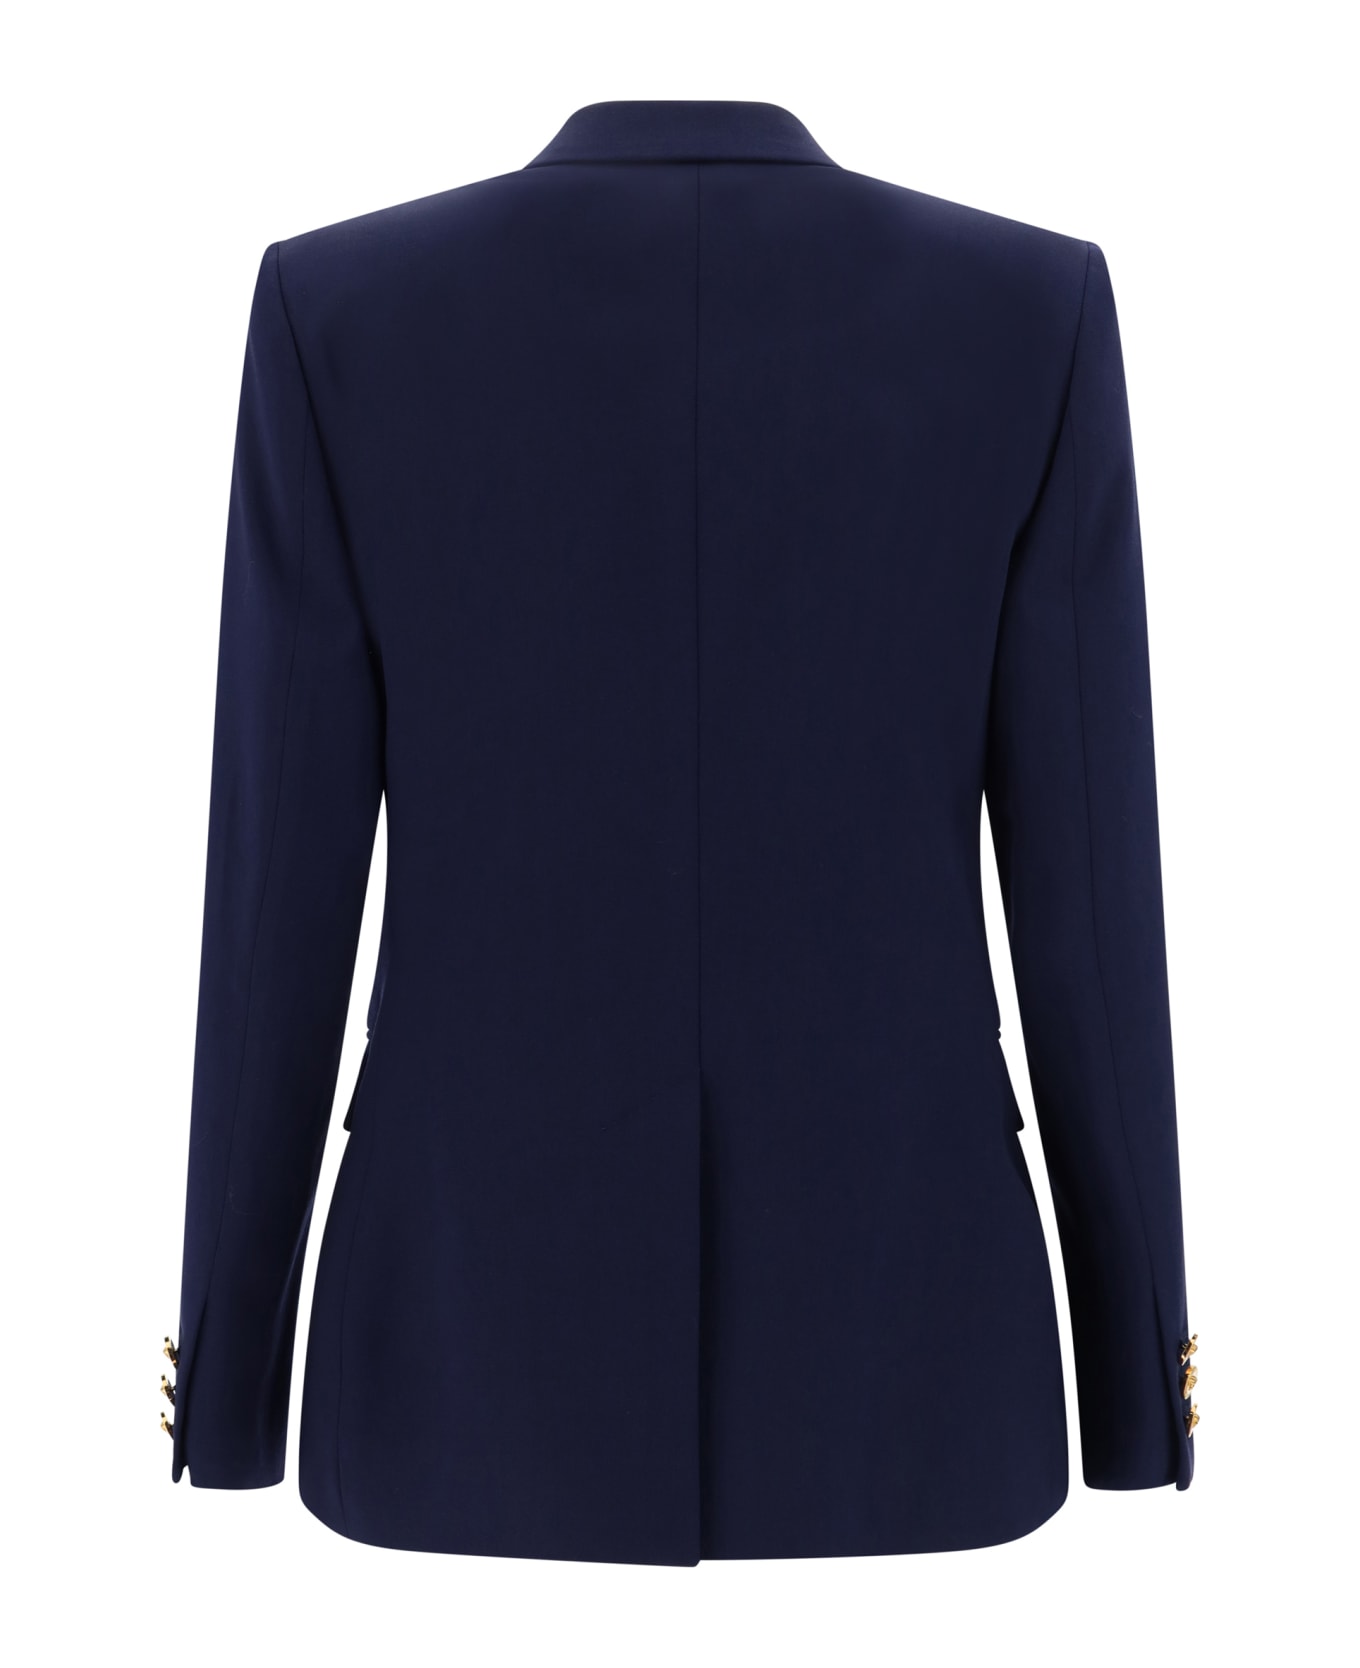 Versace Logo Patched Dinner Jacket - Navy Blue